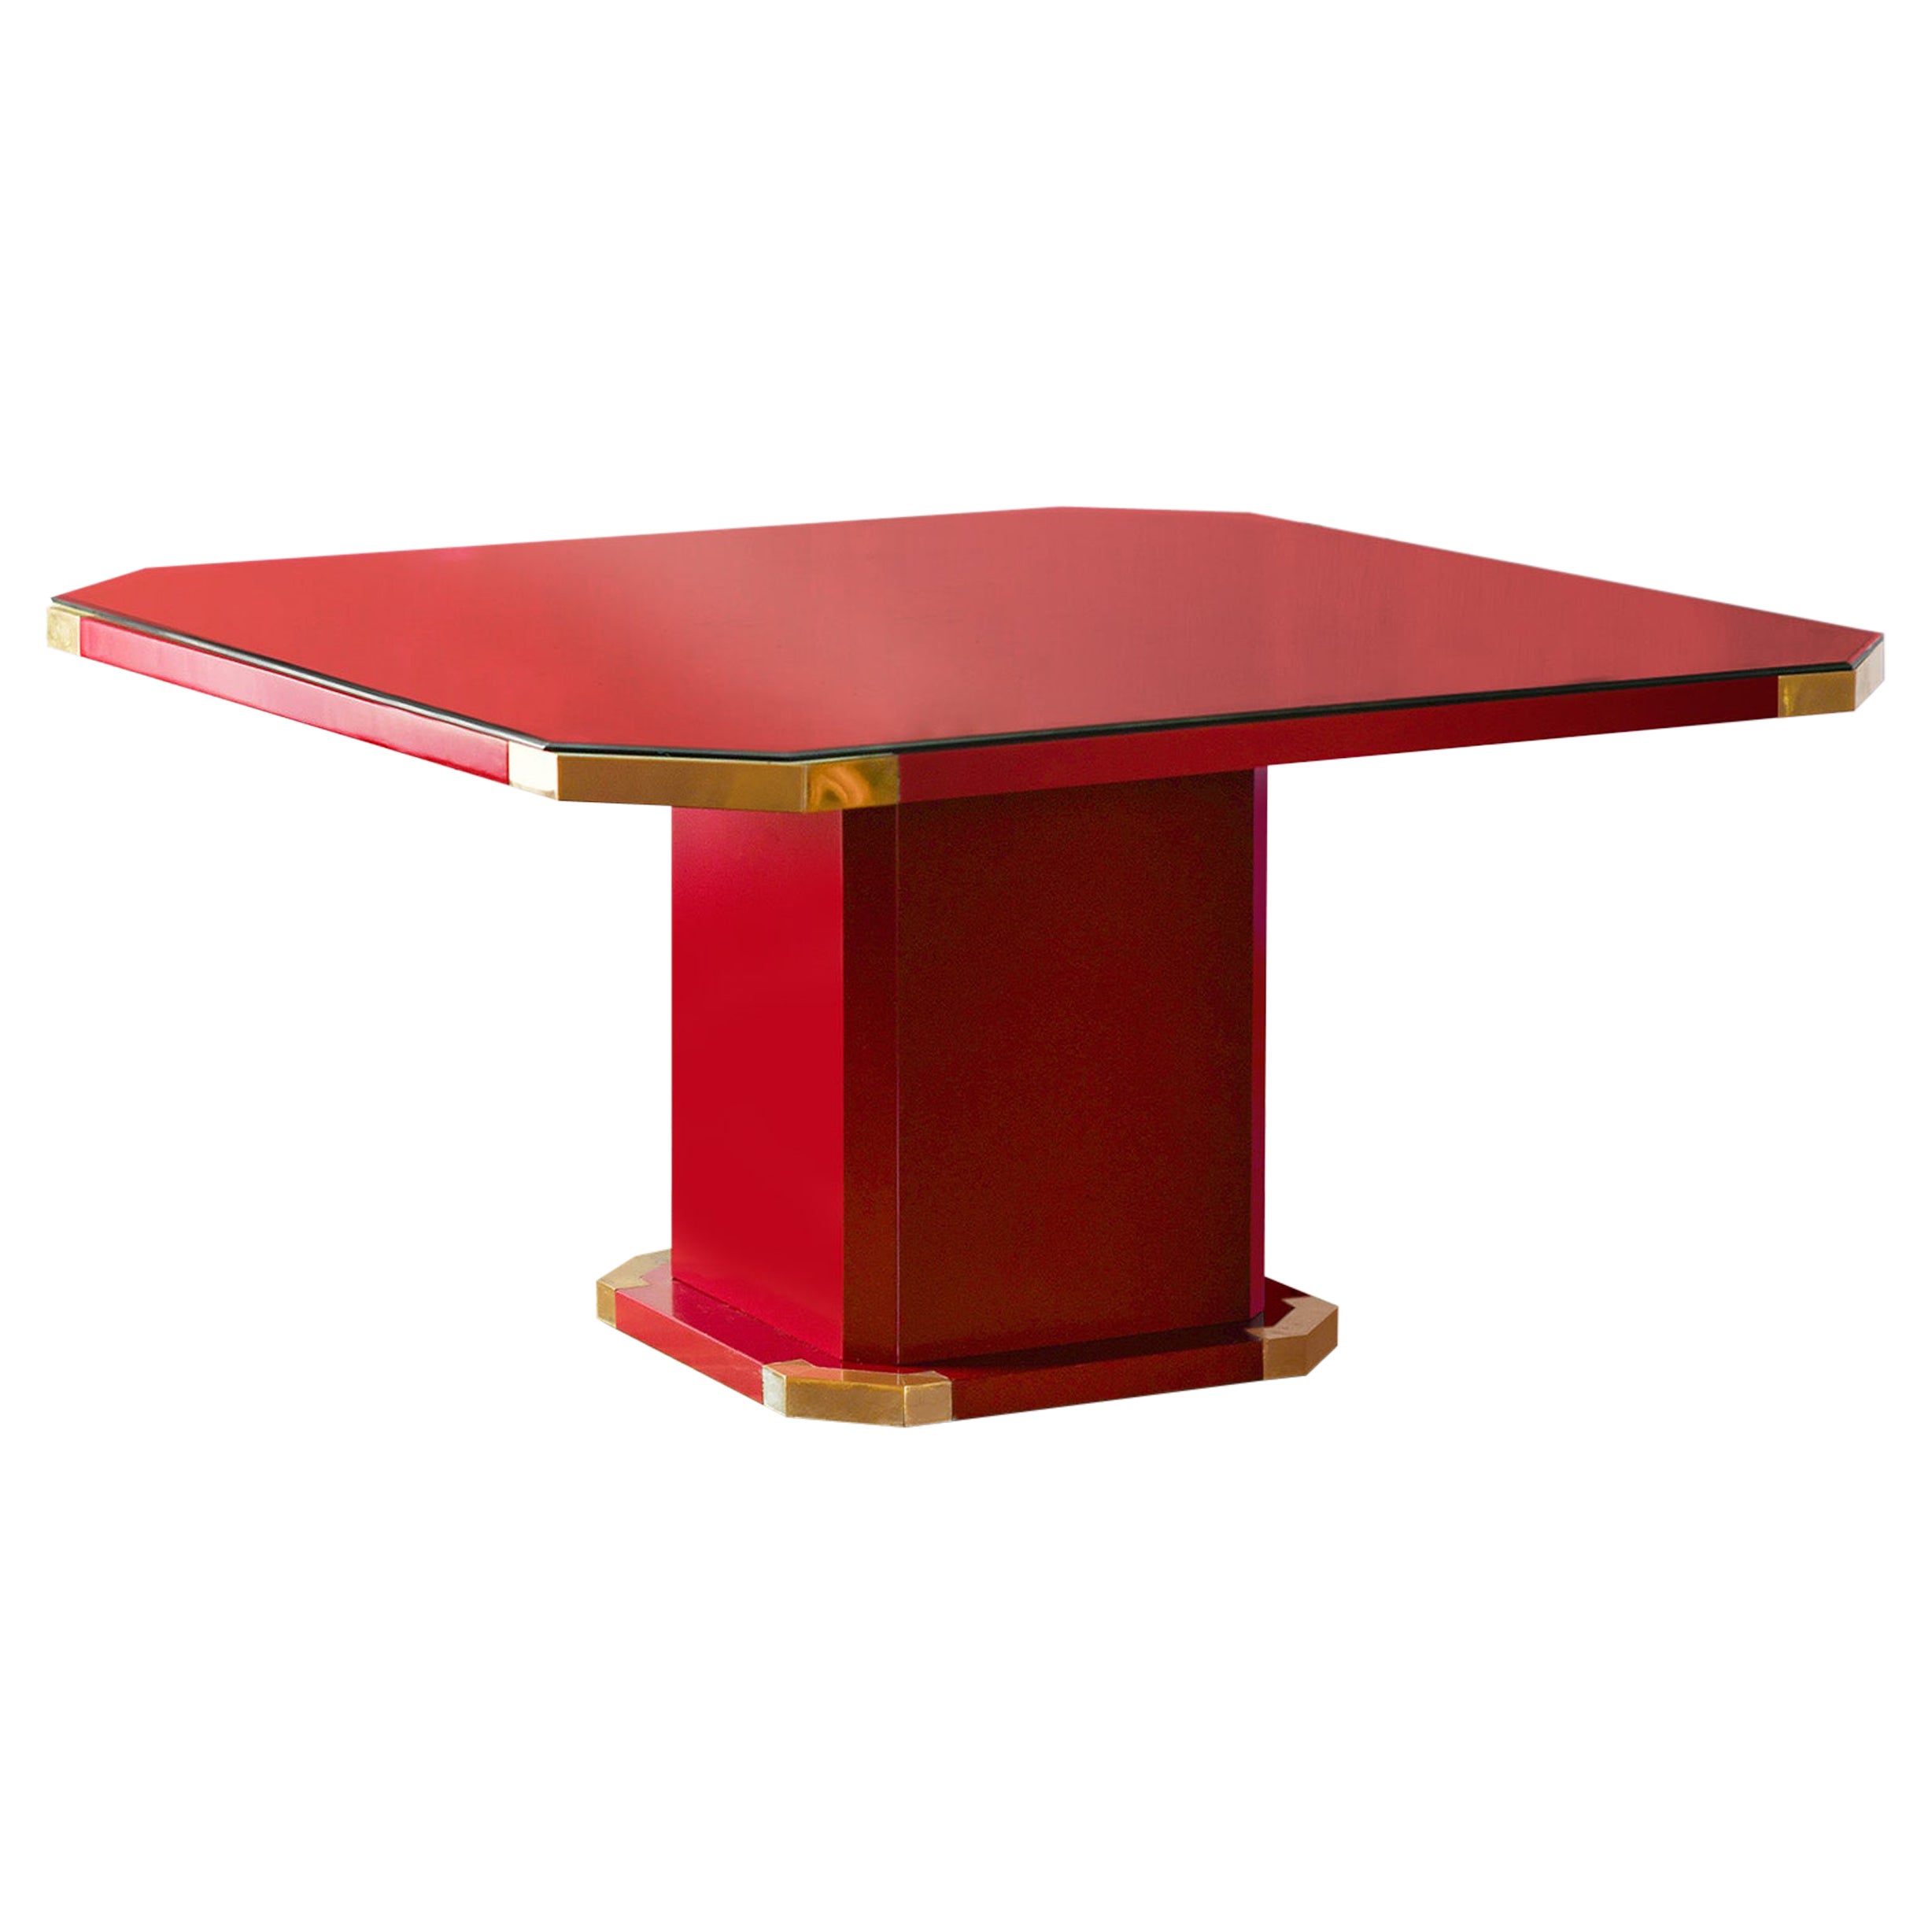 China red lacquered hexagonal table with brass details and cut crystal shelf